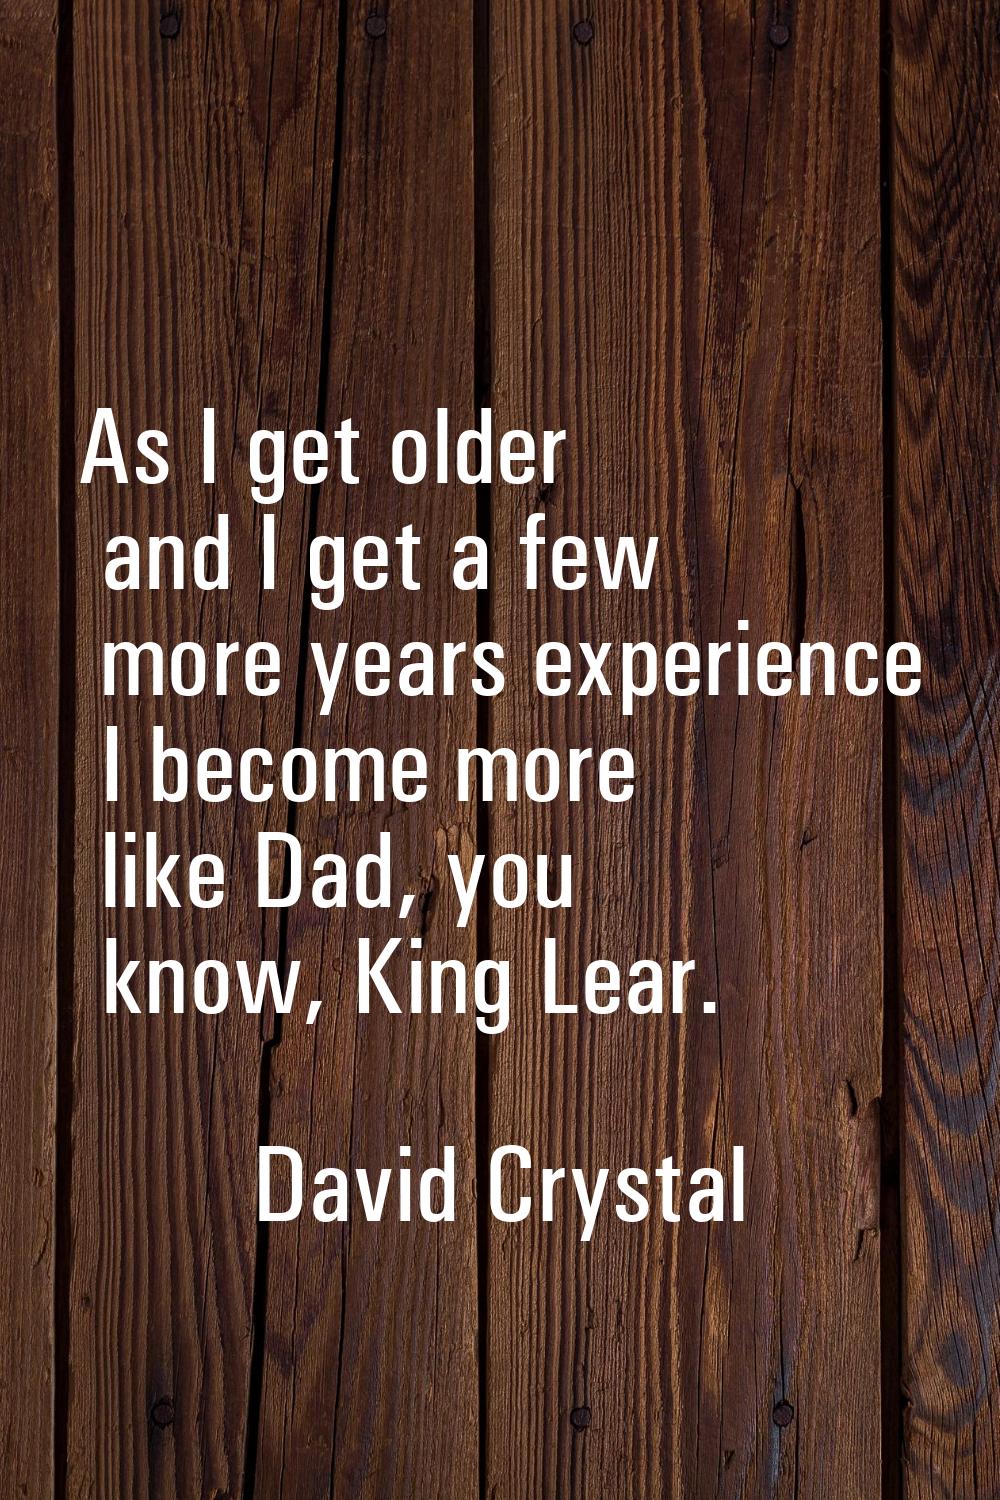 As I get older and I get a few more years experience I become more like Dad, you know, King Lear.